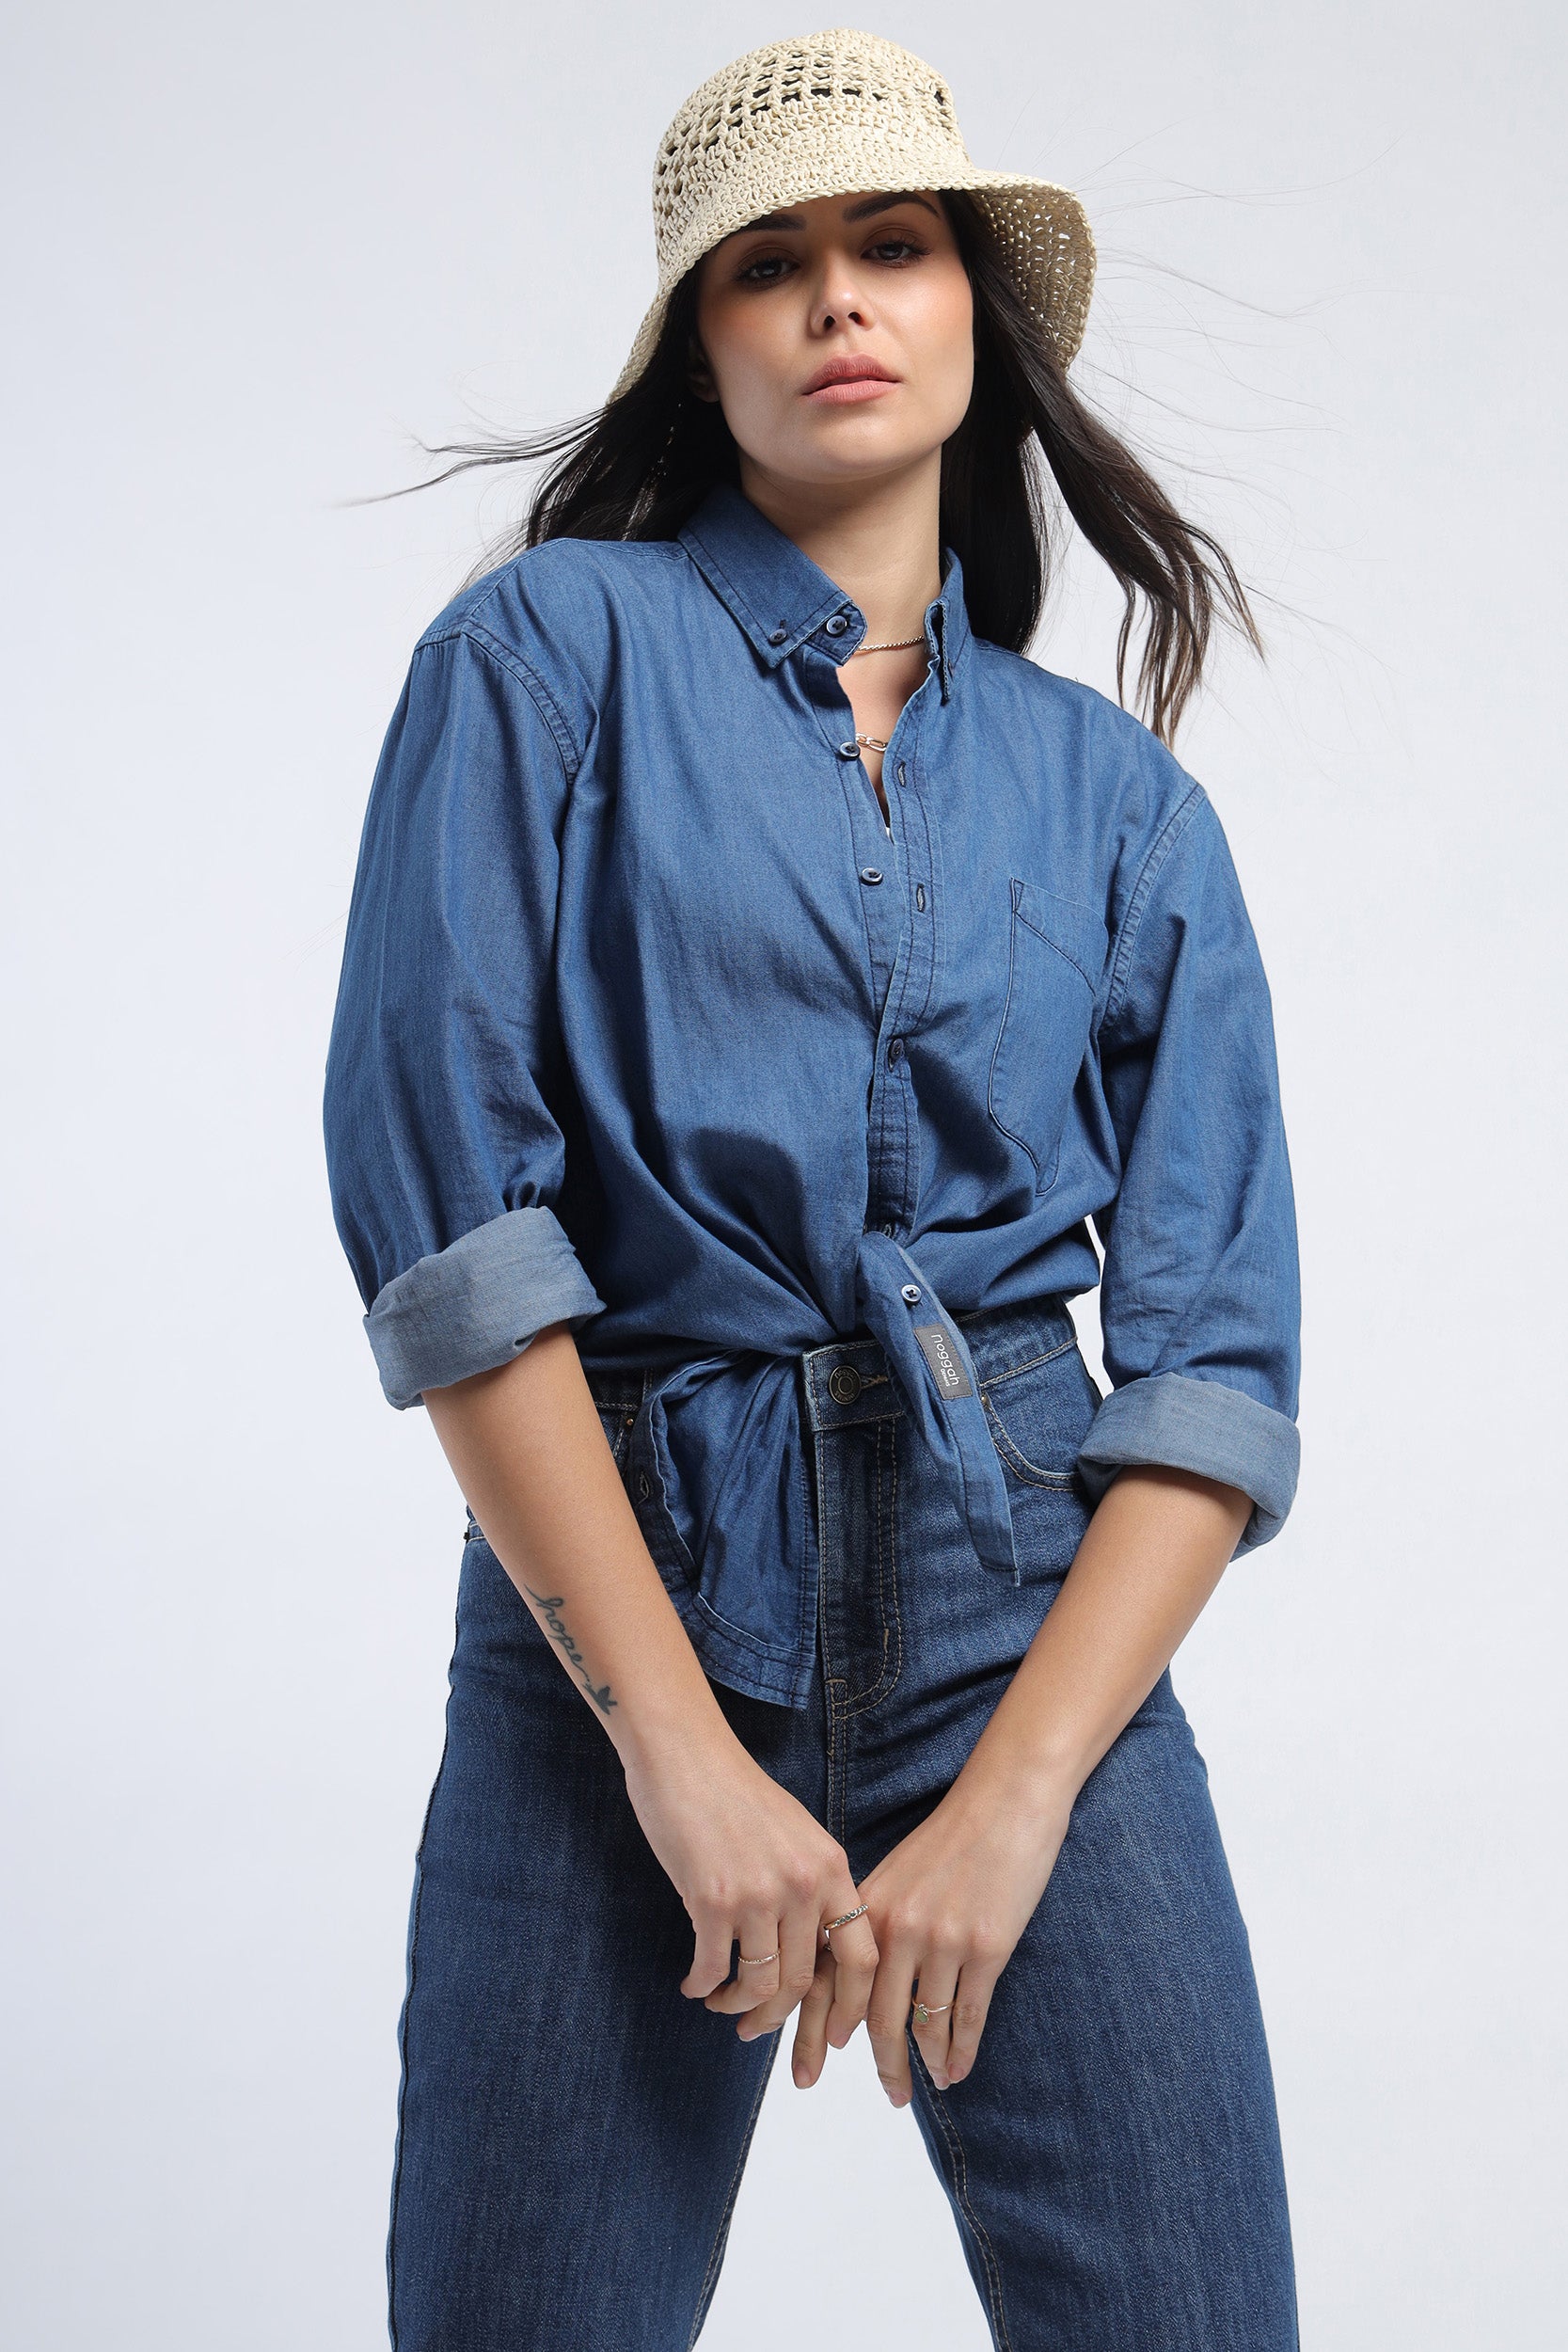 How To Wear A Denim Shirt For Every Season |30+ Looks | Ways Of Style | Shirt  outfit women, Denim shirt outfit, Light chambray shirt